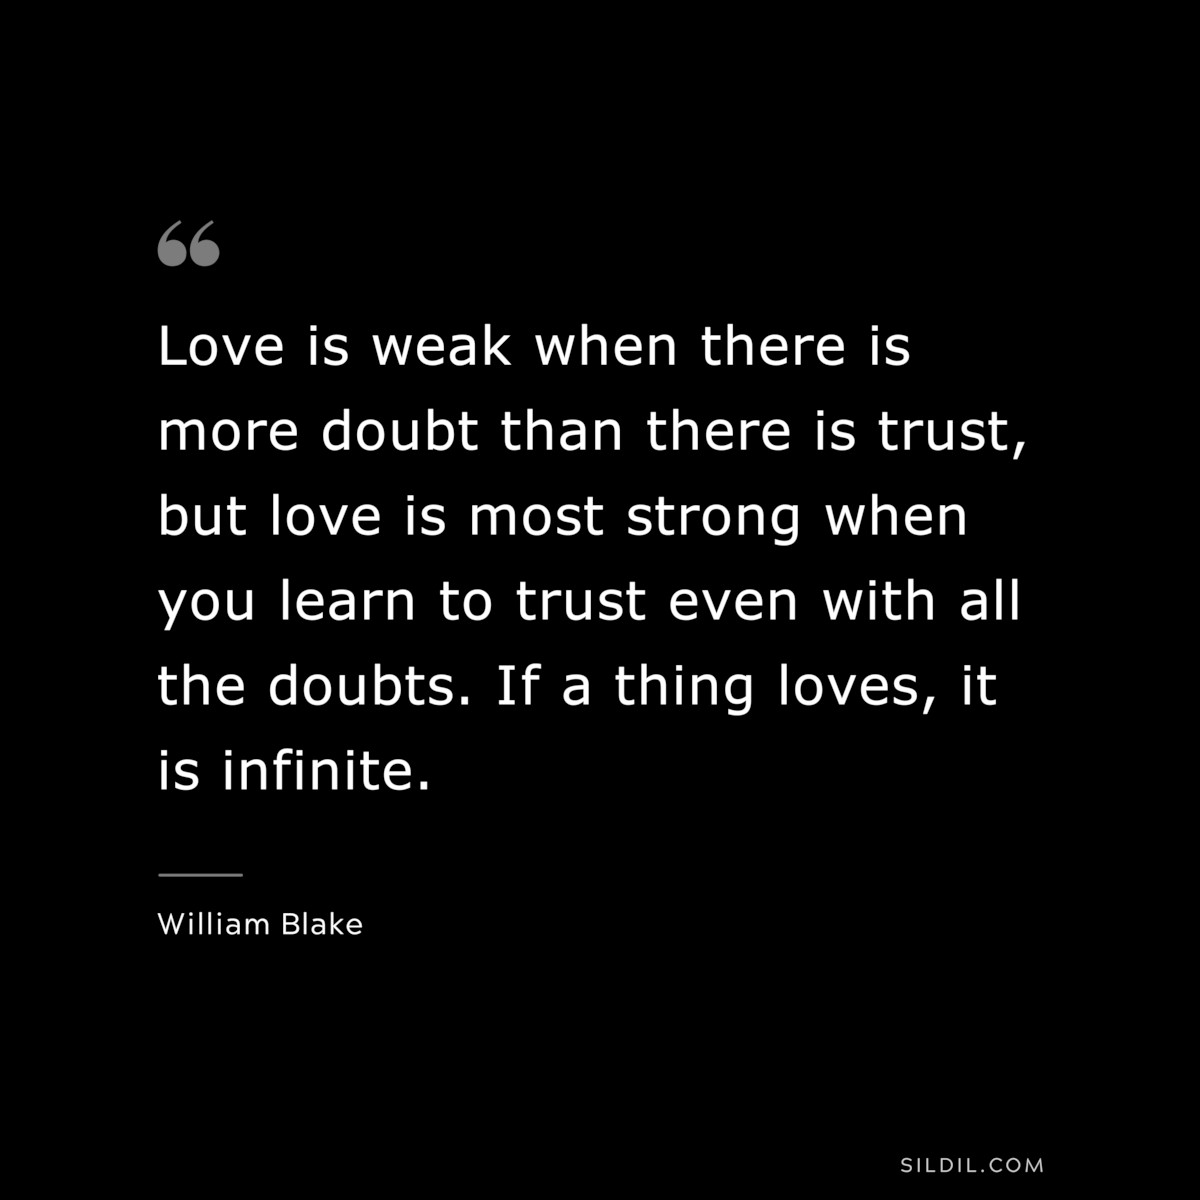 Love is weak when there is more doubt than there is trust, but love is most strong when you learn to trust even with all the doubts. If a thing loves, it is infinite. ― William Blake